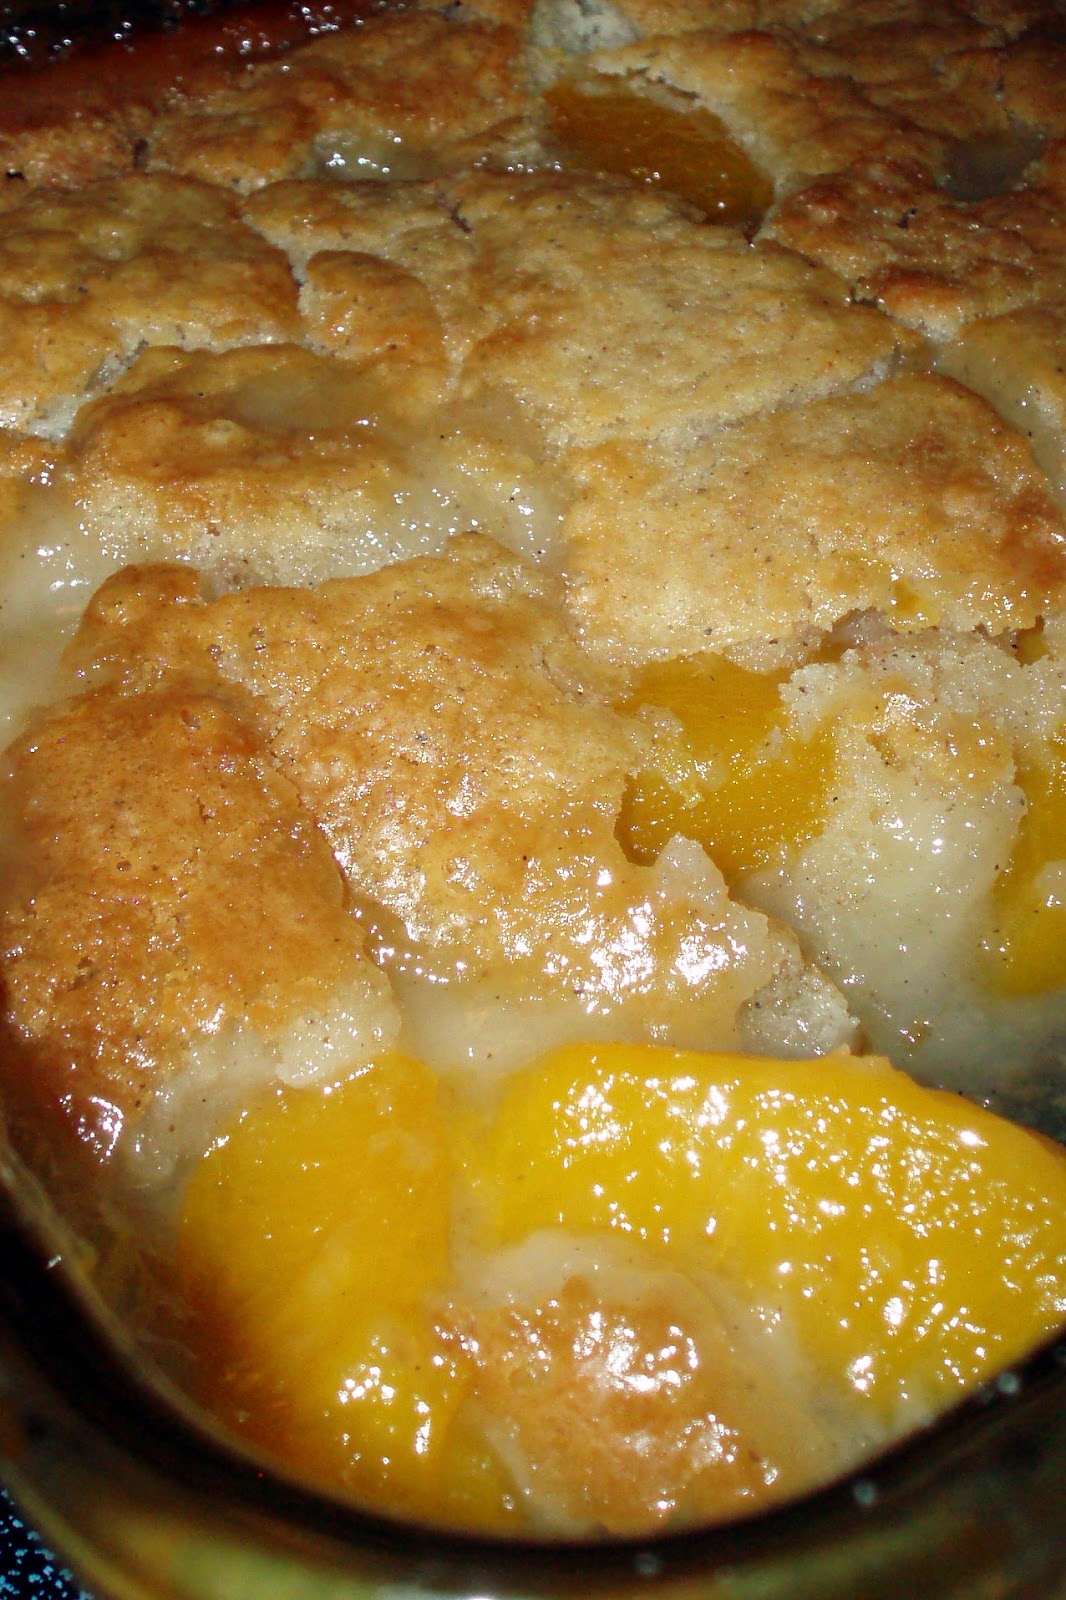 Peach Cobbler Recipe Canned / easy peach cobbler using canned biscuits - A great family dessert and can easily be doubled or tripled to quantity of fruit.